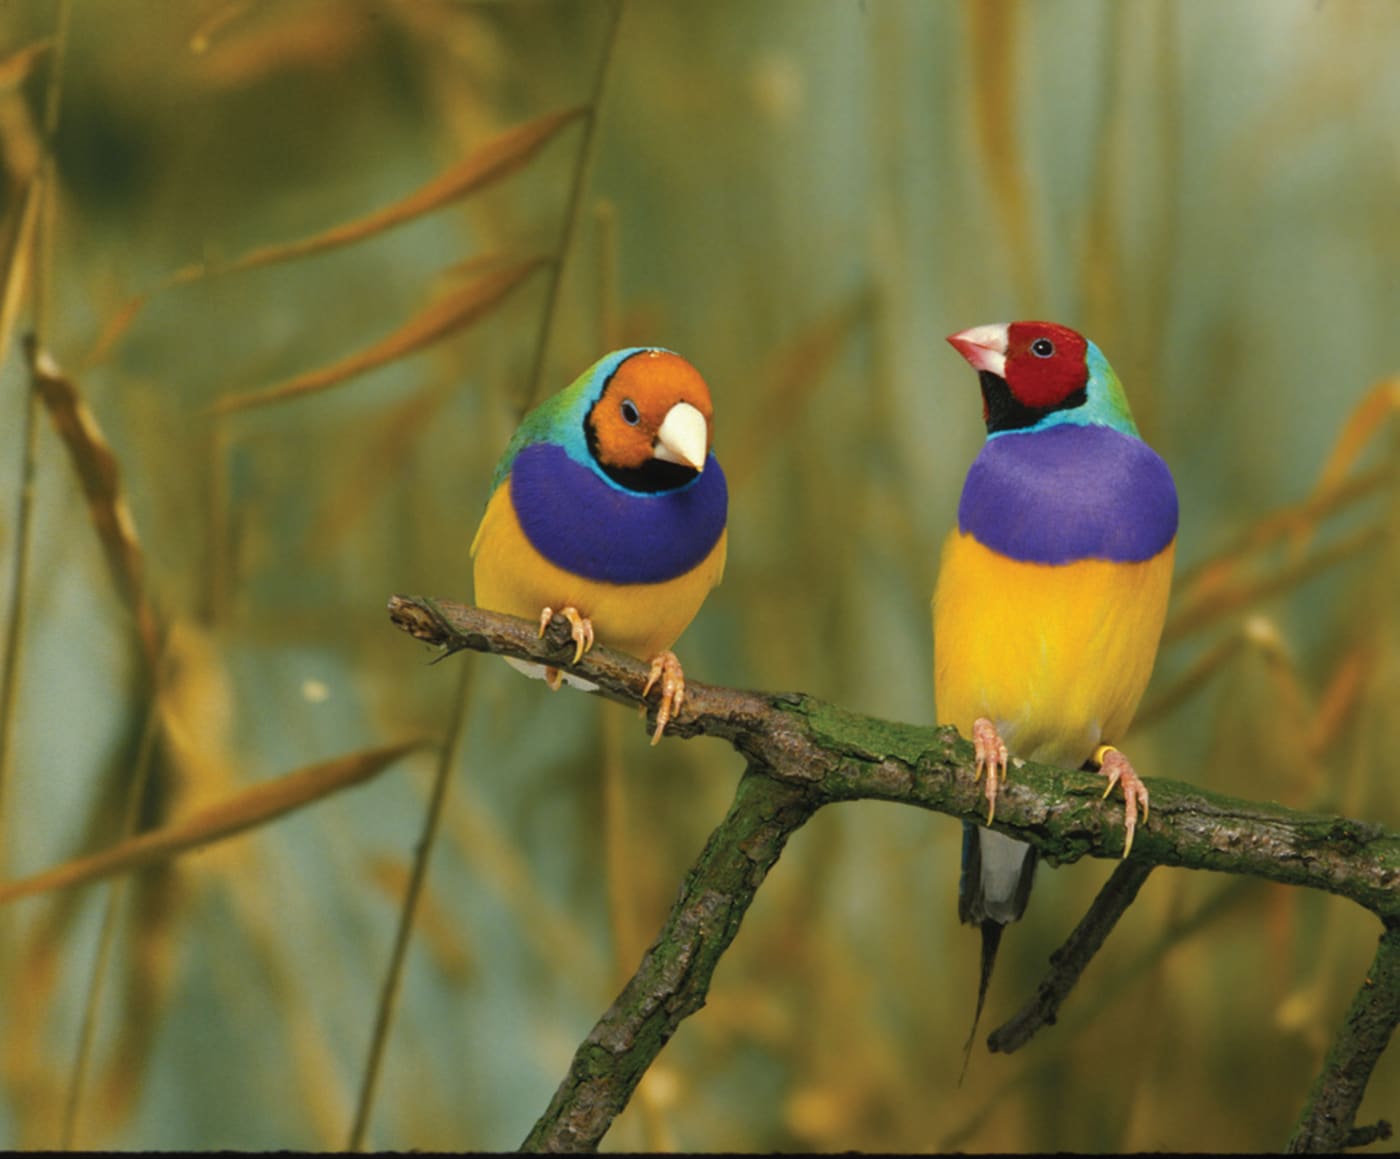 Gouldian finches on a branch